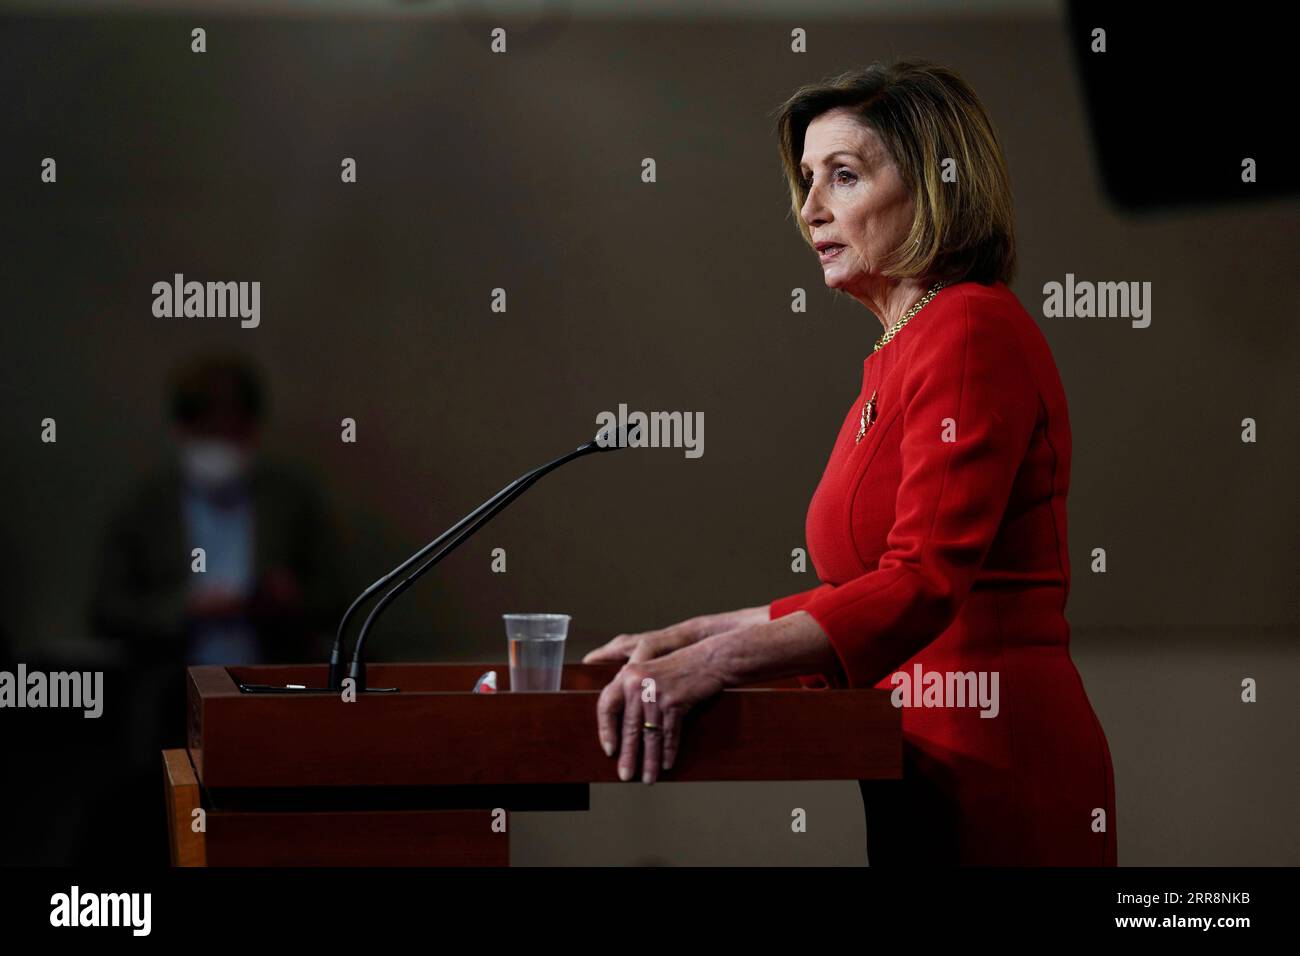 210513 -- WASHINGTON, May 13, 2021 -- U.S. House Speaker Nancy Pelosi speaks during her weekly press conference on Capitol Hill in Washington, D.C., the United States, on May 13, 2021. Photo by /Xinhua U.S.-WASHINGTON, D.C.-PELOSI-PRESS CONFERENCE TingxShen PUBLICATIONxNOTxINxCHN Stock Photo